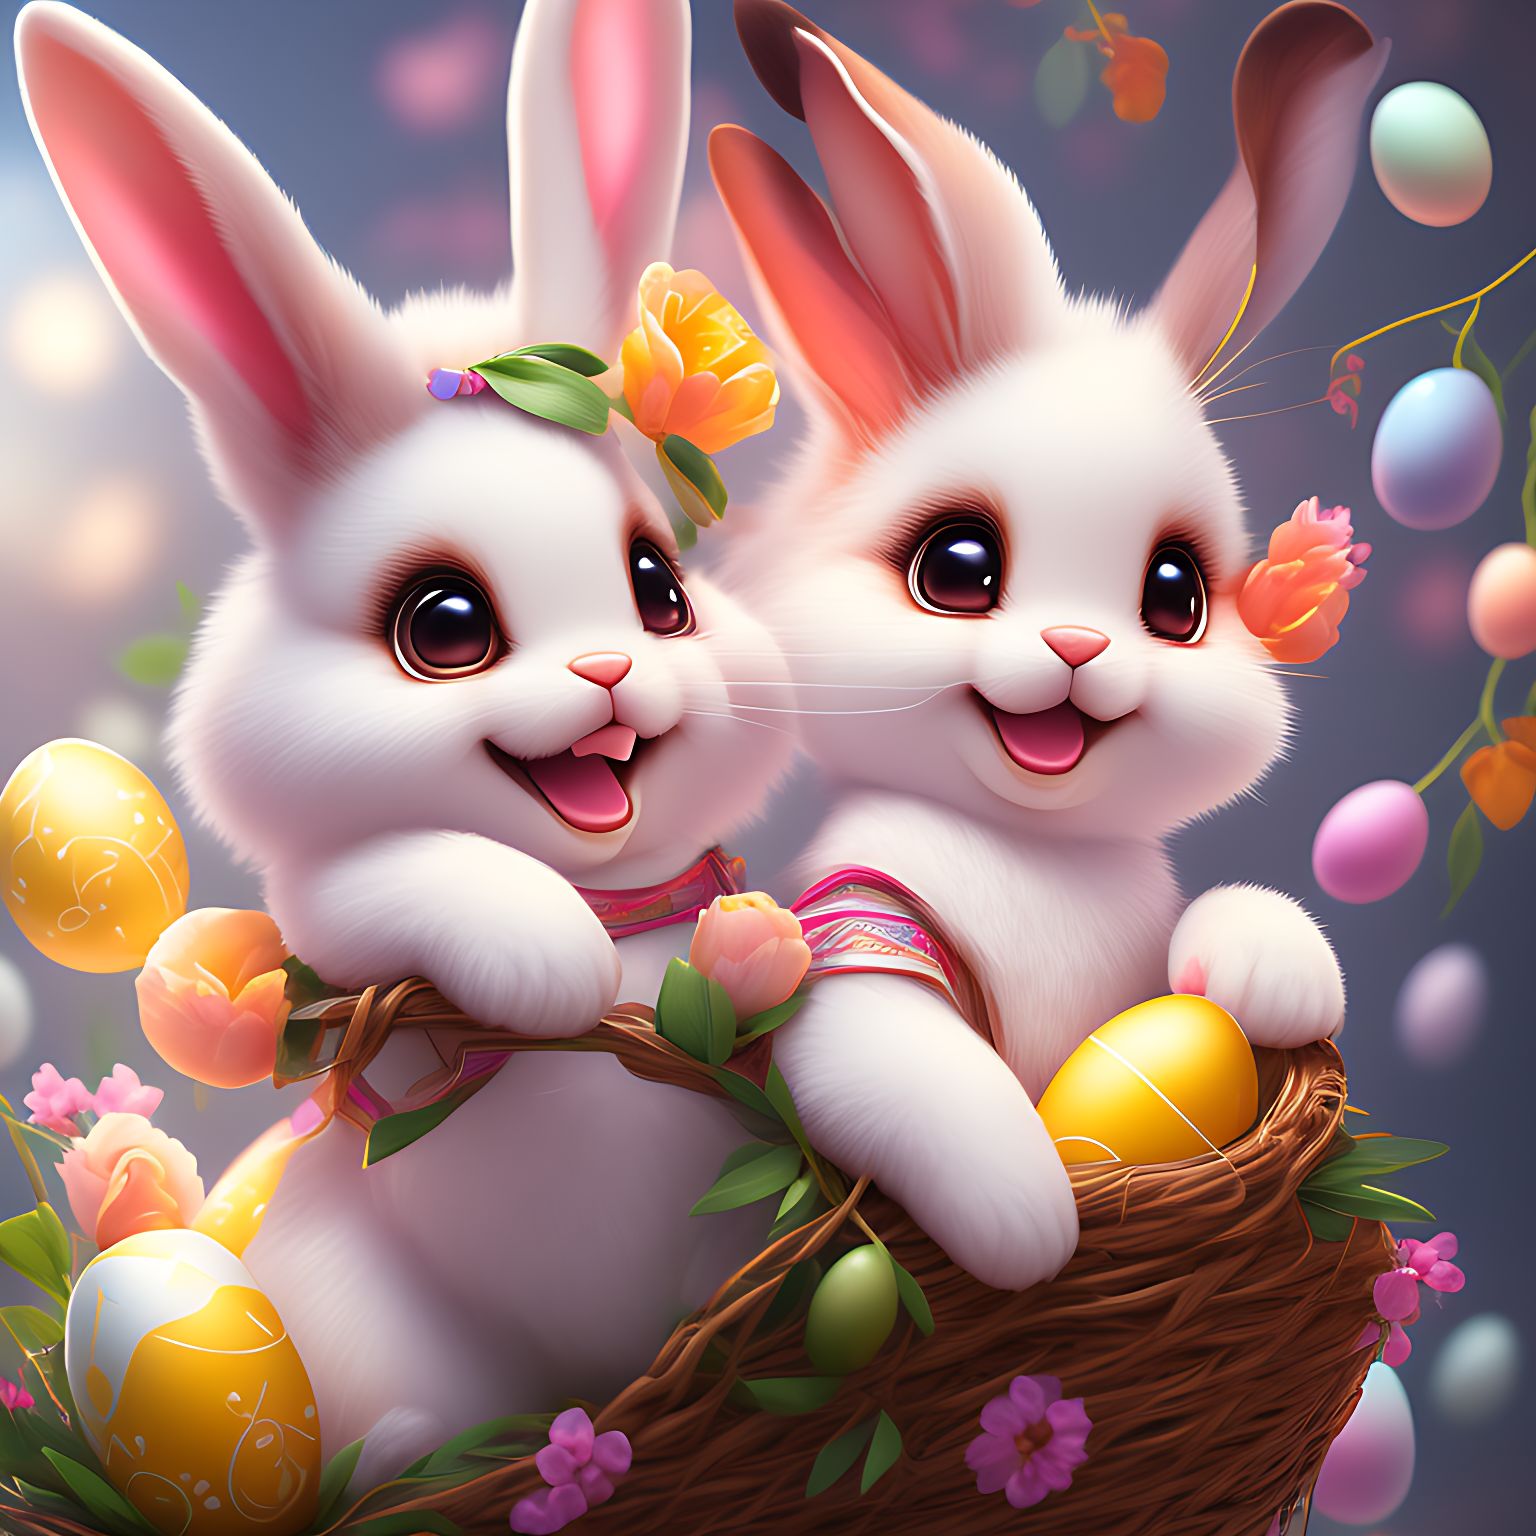 Christal: Smiling Bunny cute cartoon rabbit with easter eggs, dimantion 8* spring